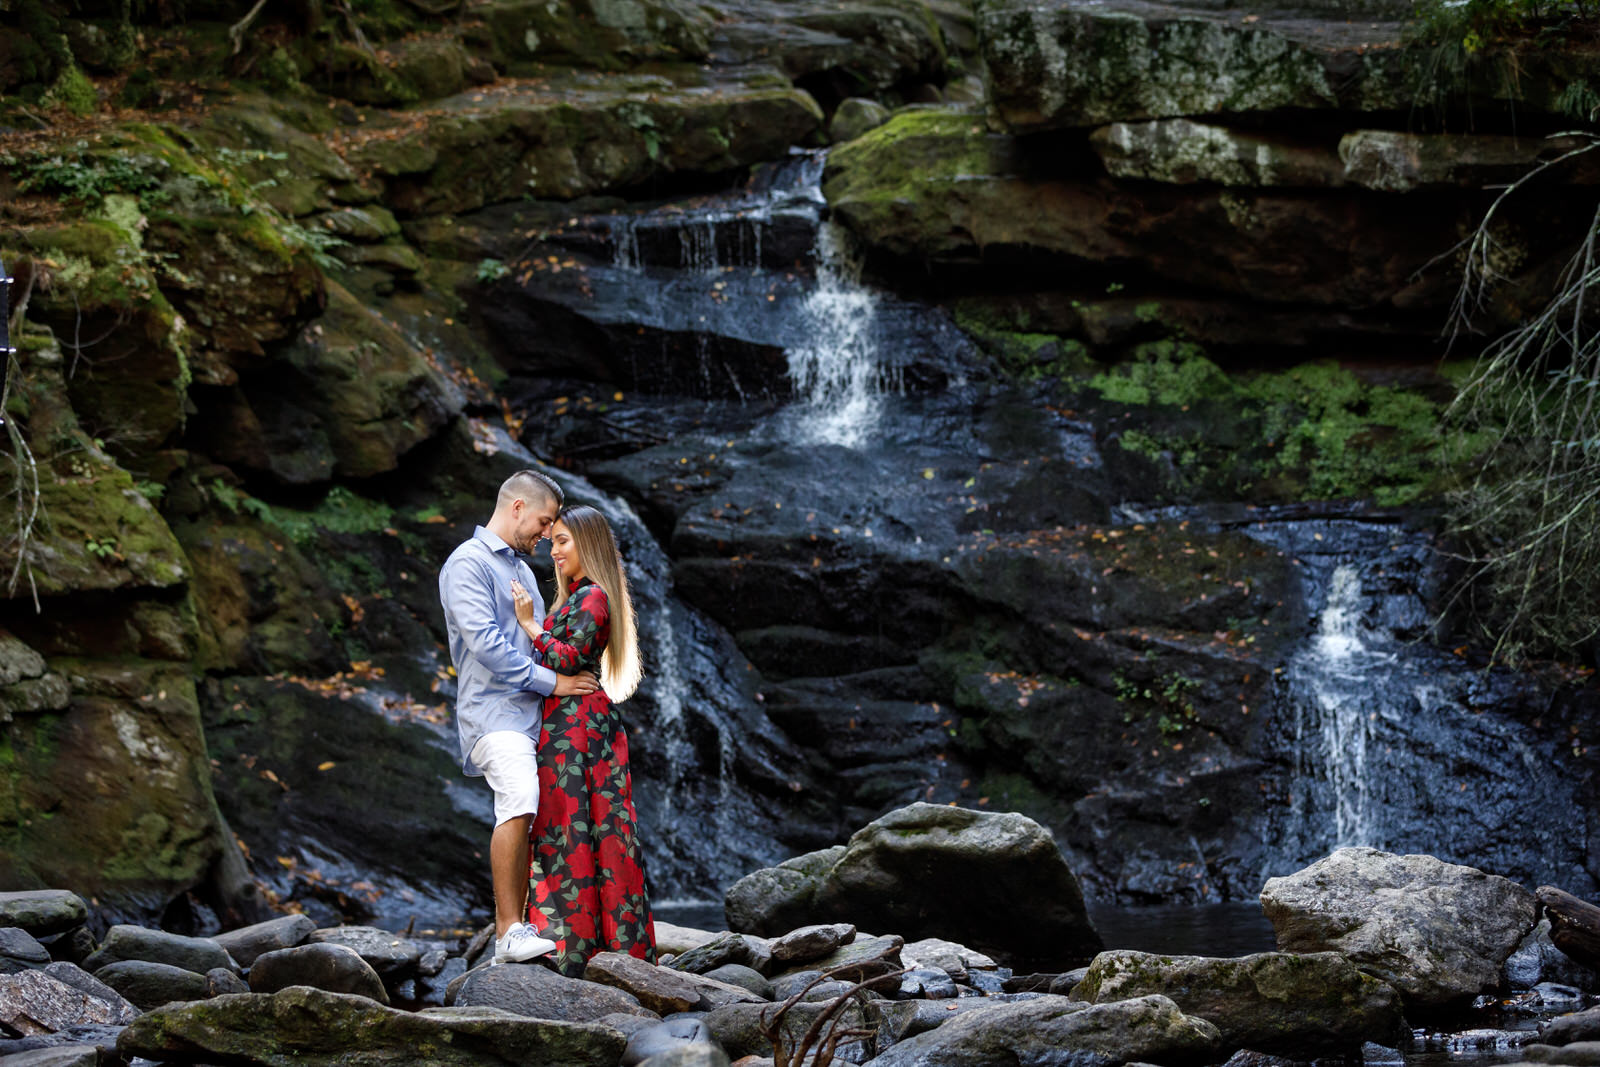 Incredible photo of an engaged couple in front of a double waterfall